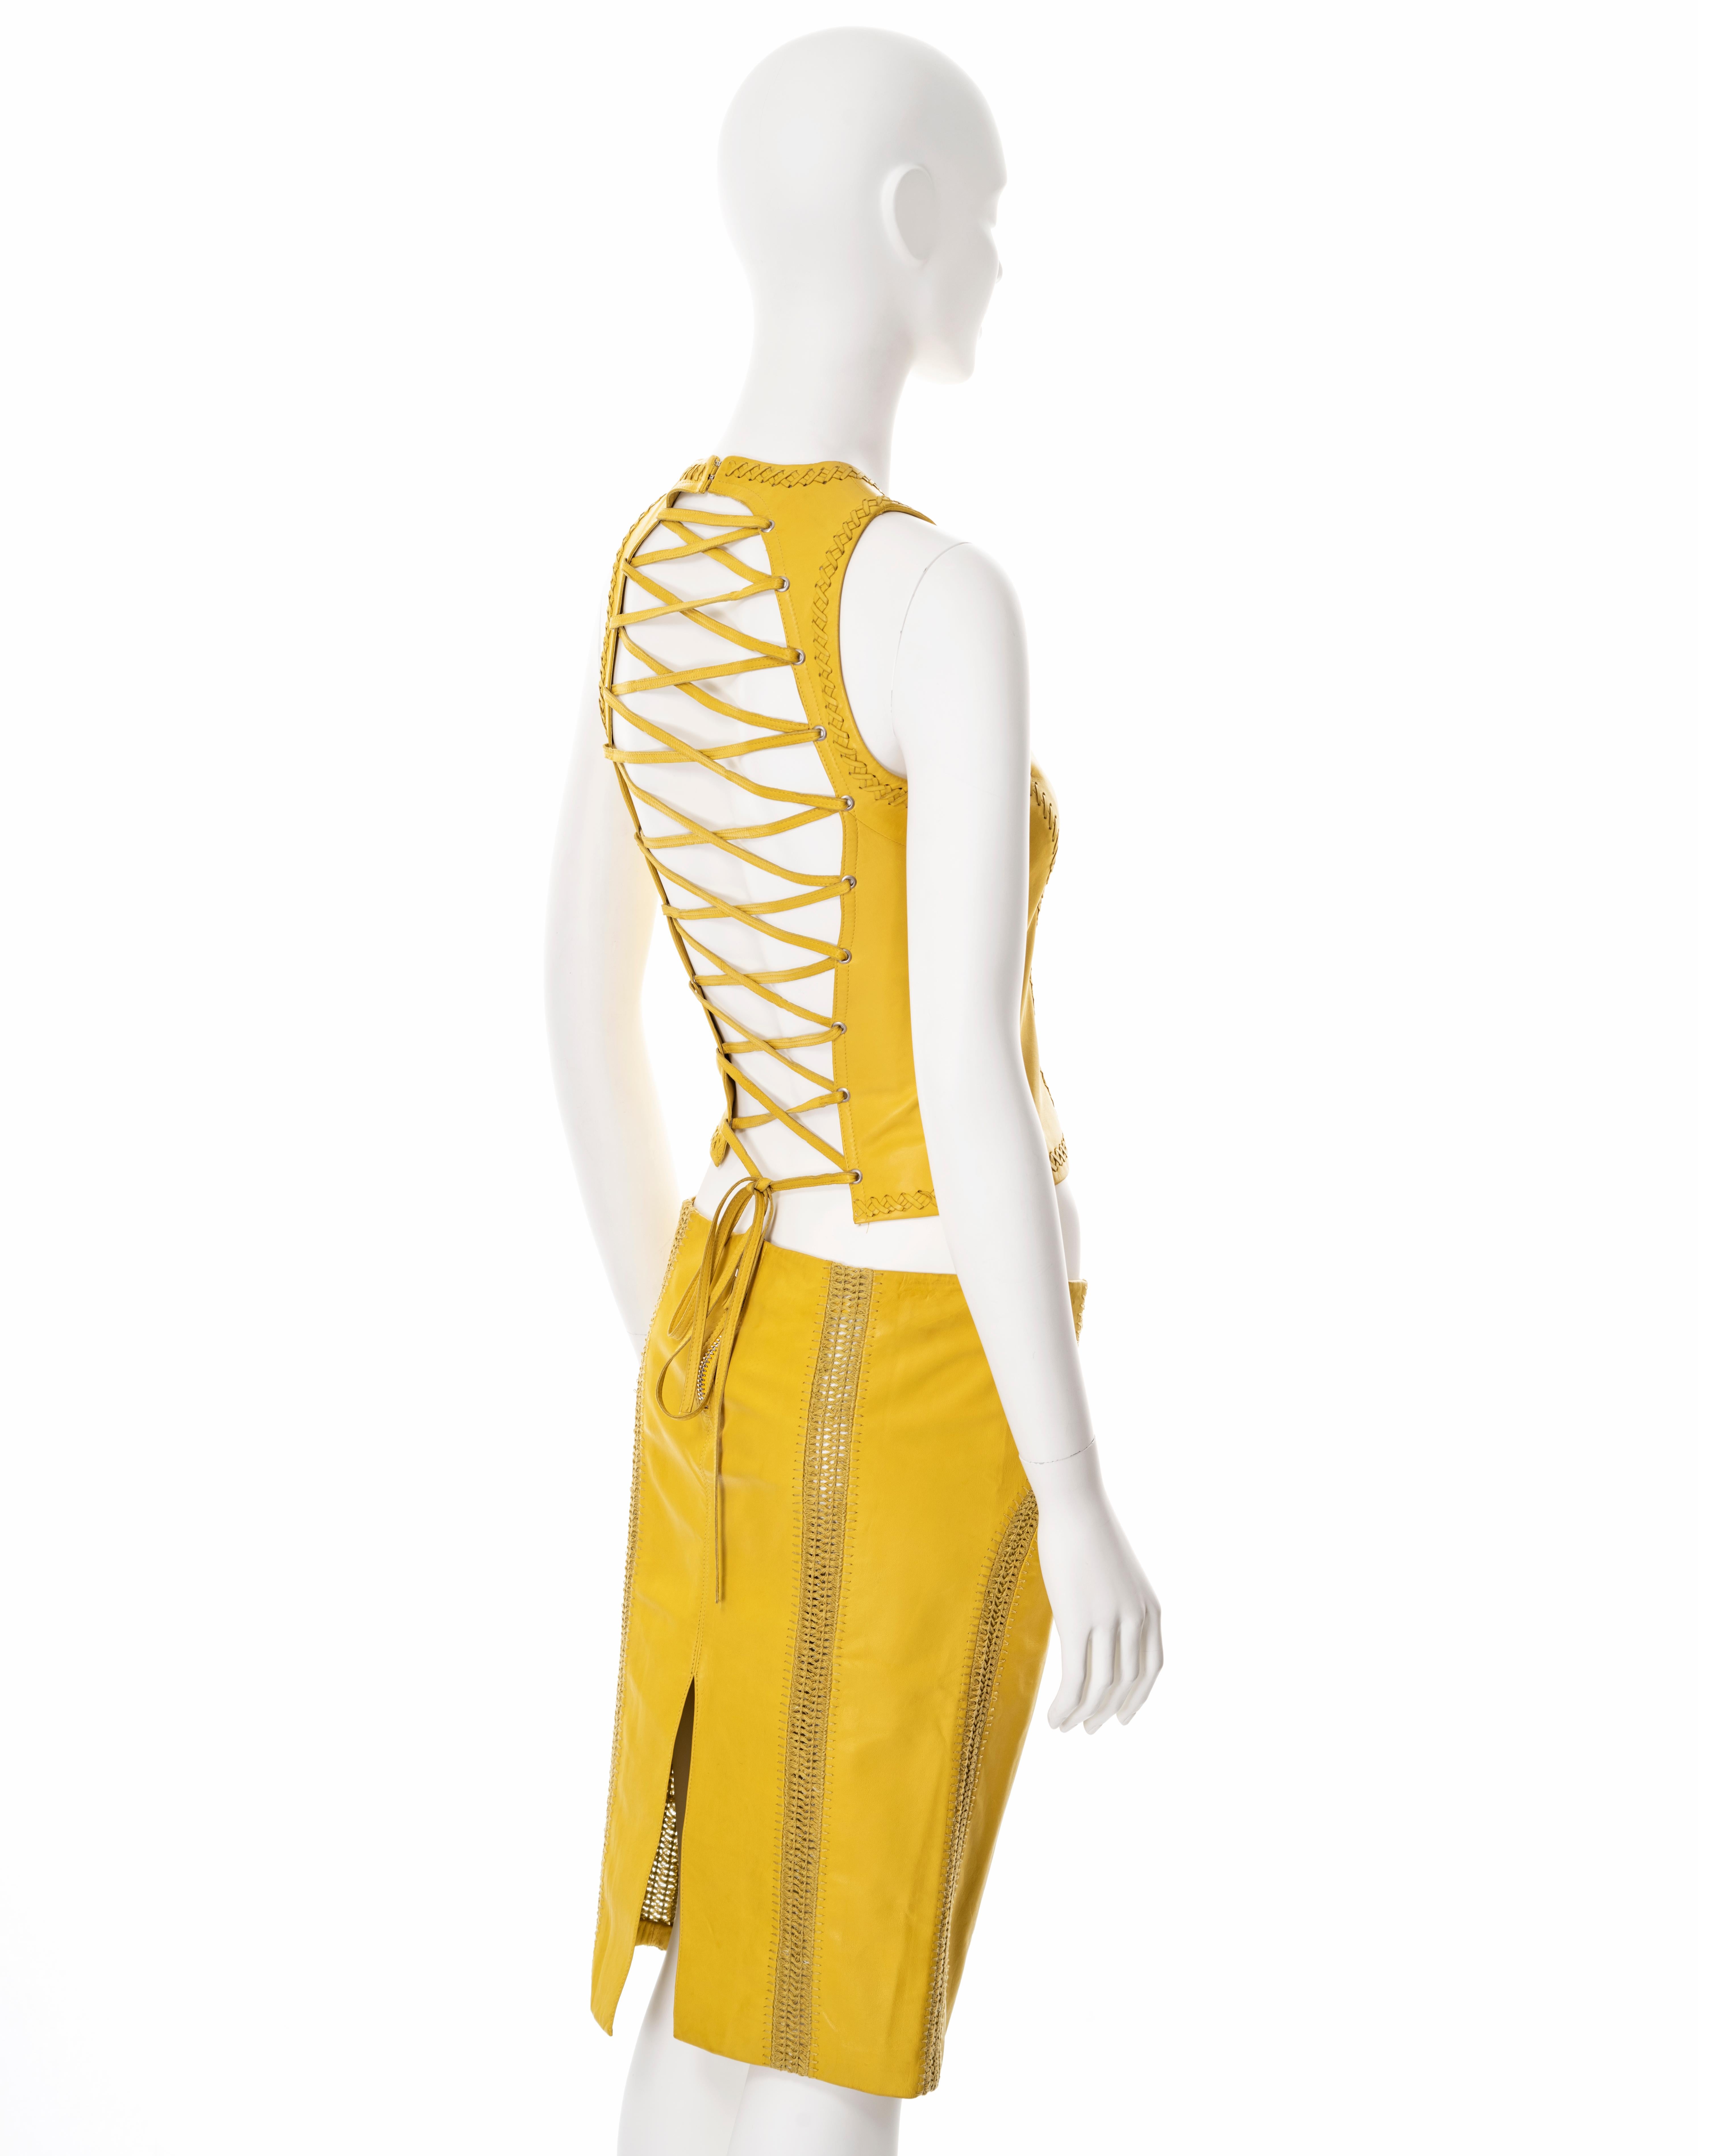 Gianni Versace yellow lambskin leather top and skirt, ss 2003 For Sale 1